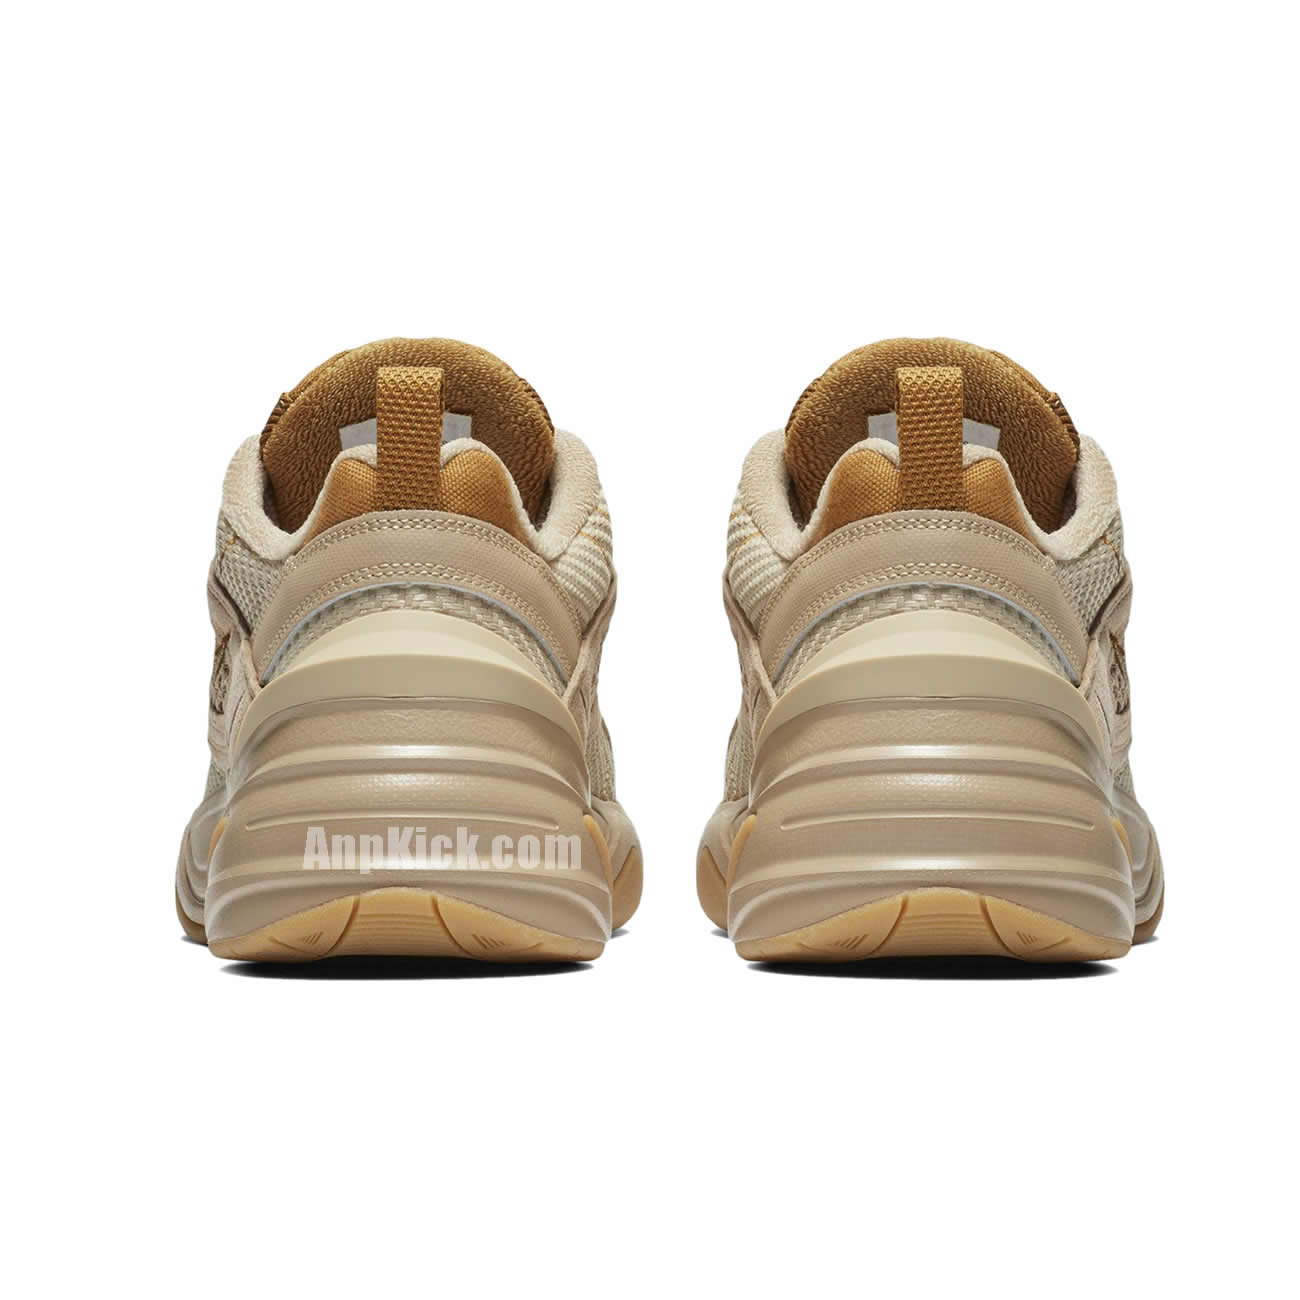 Nike M2k Techno Mens Womens Sp Linen Ale Brown Wheat Running Shoes Bv0074 200 (4) - newkick.org